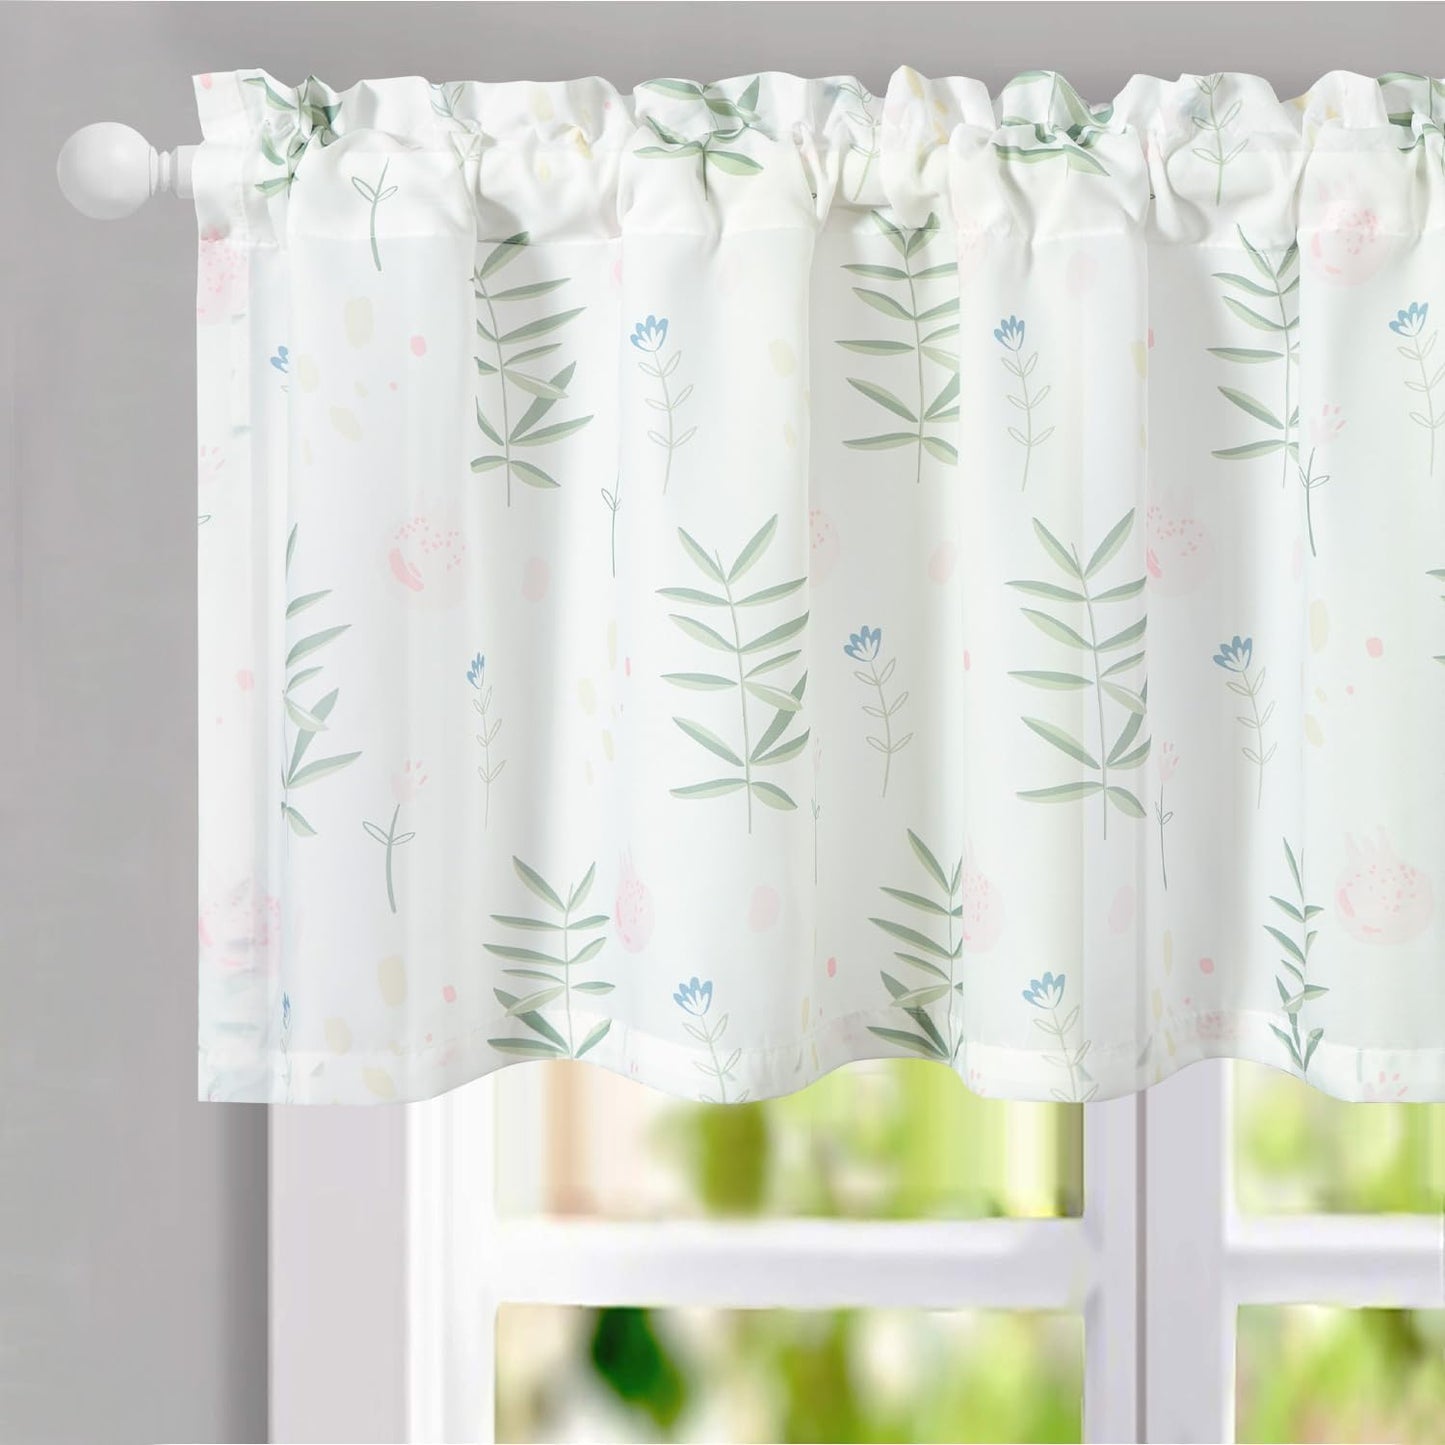 VOGOL Colorful Floral Print Tier Curtains, 2 Panels Smooth Textured Decorative Cafe Curtain, Rod Pocket Sheer Drapery for Farmhouse, W 30 X L 24  VOGOL Mn006 W52 X L18 